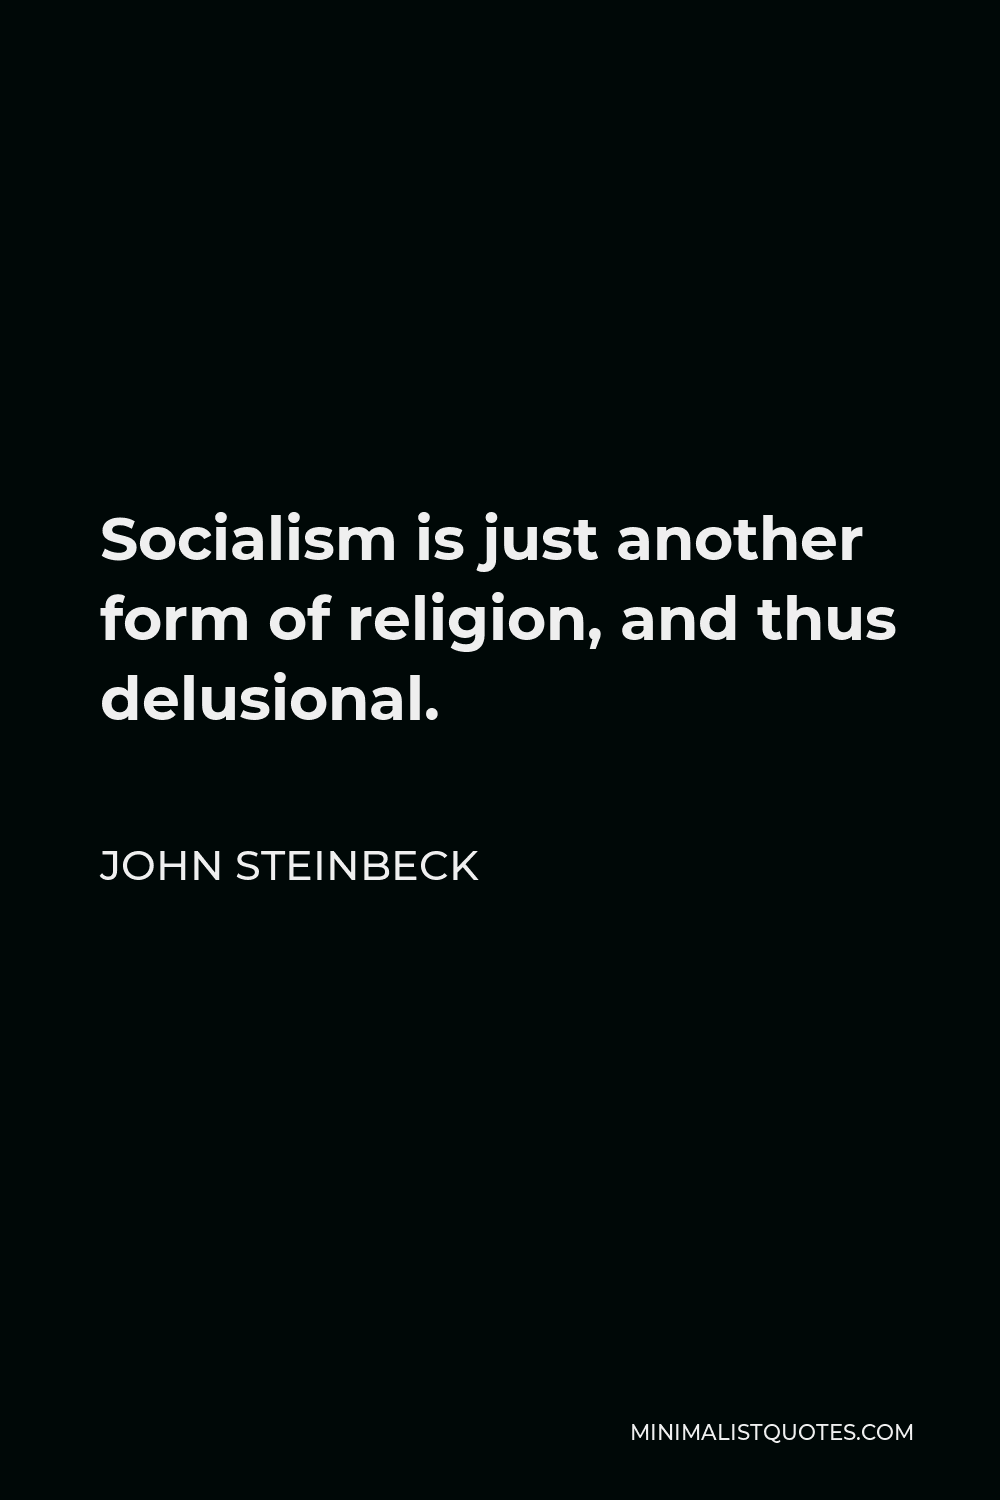 John Steinbeck Quote - Socialism is just another form of religion, and thus delusional.